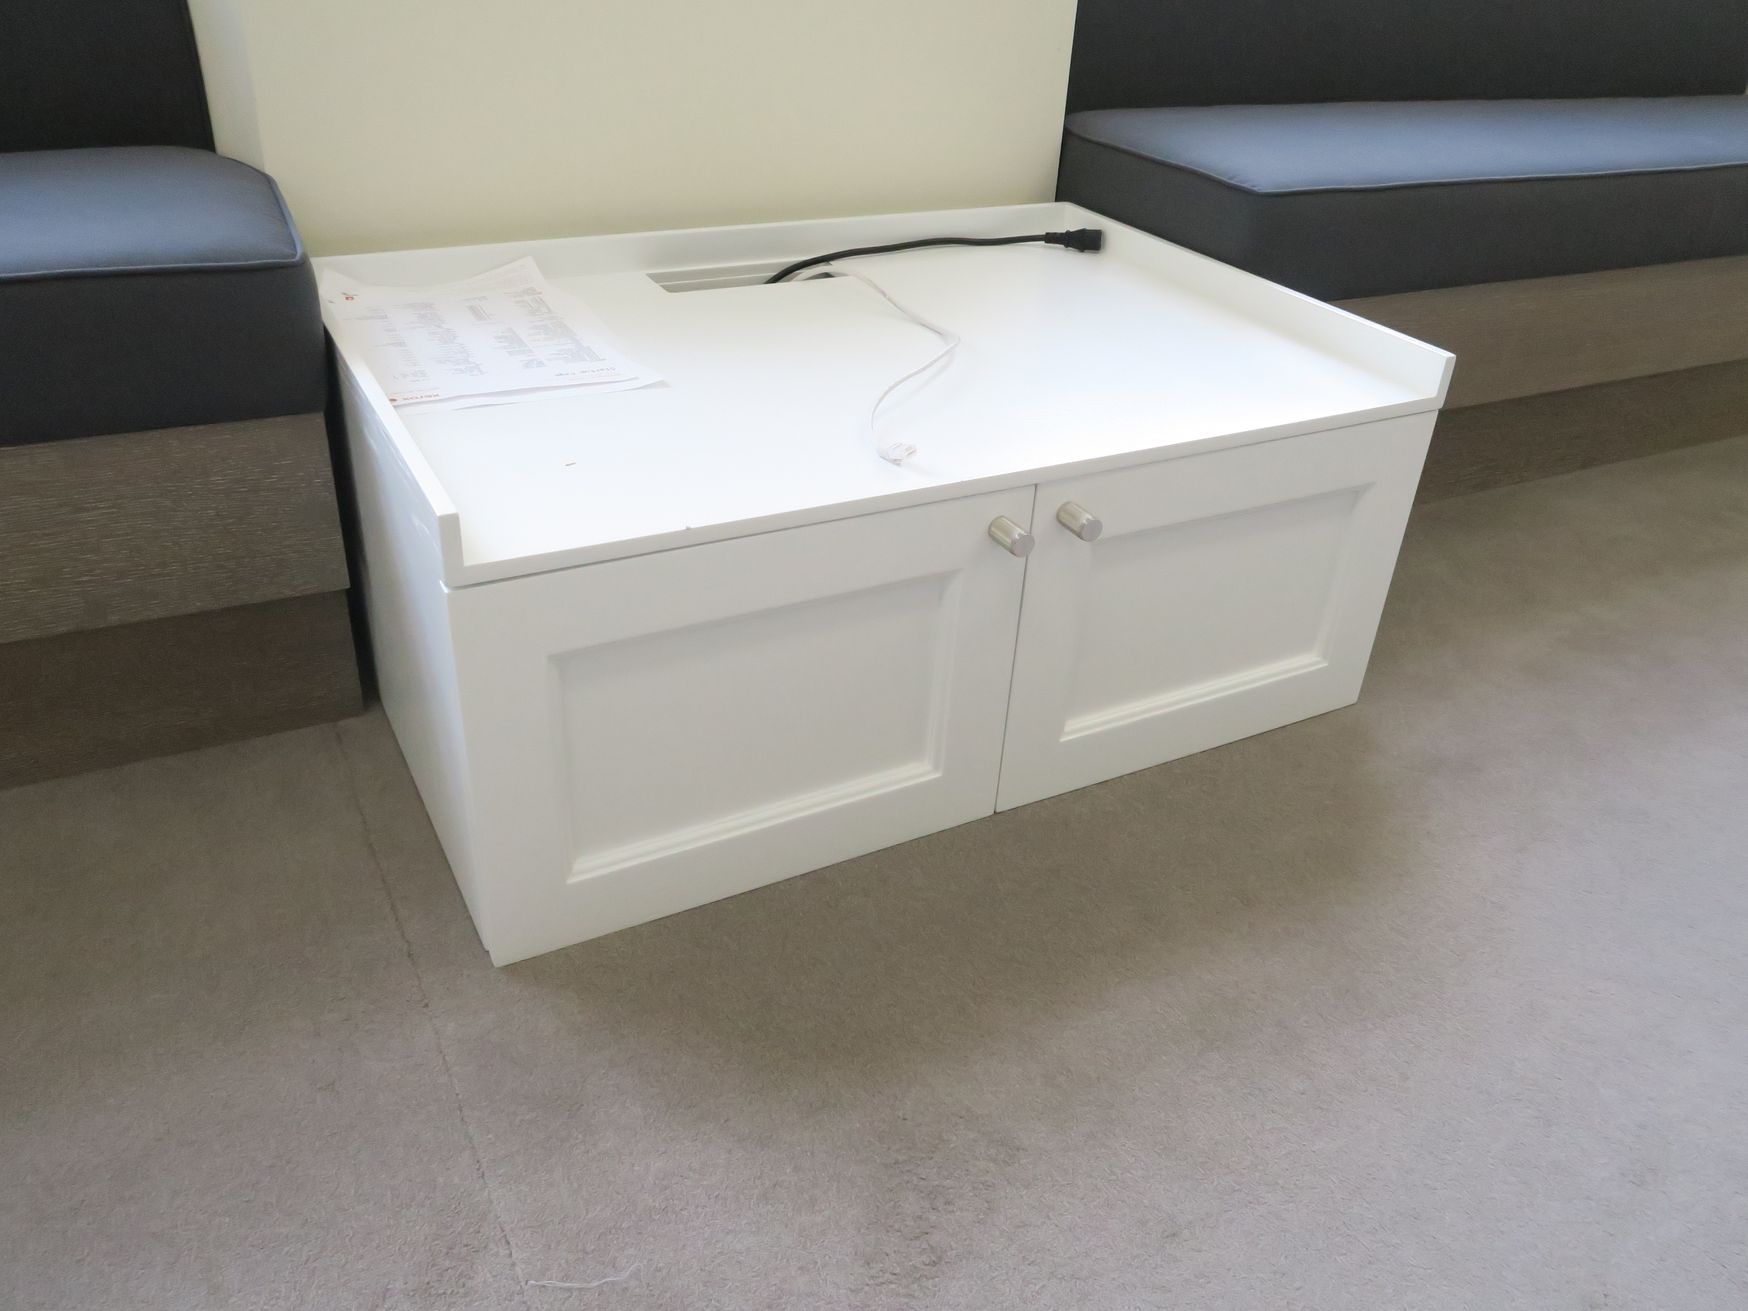 White printer table with storage below.